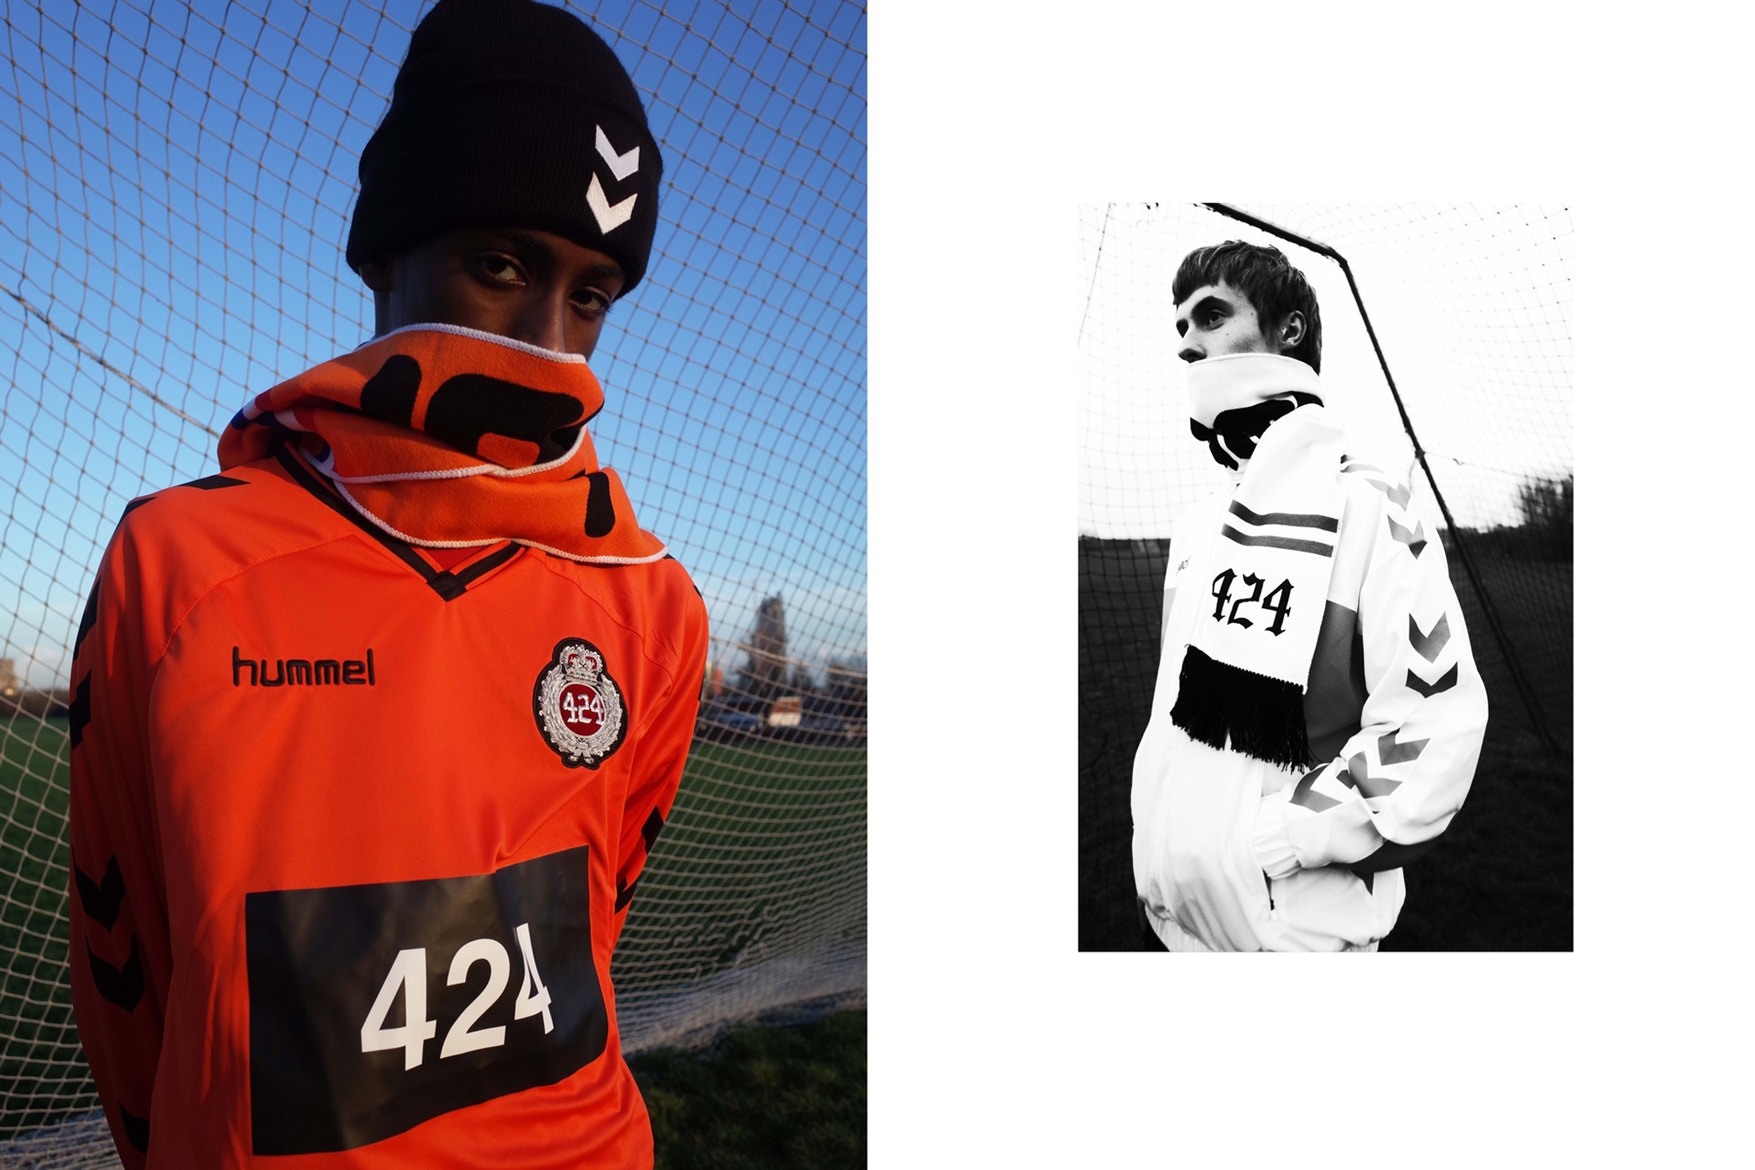 HUMMEL x 424 Capsule Collection